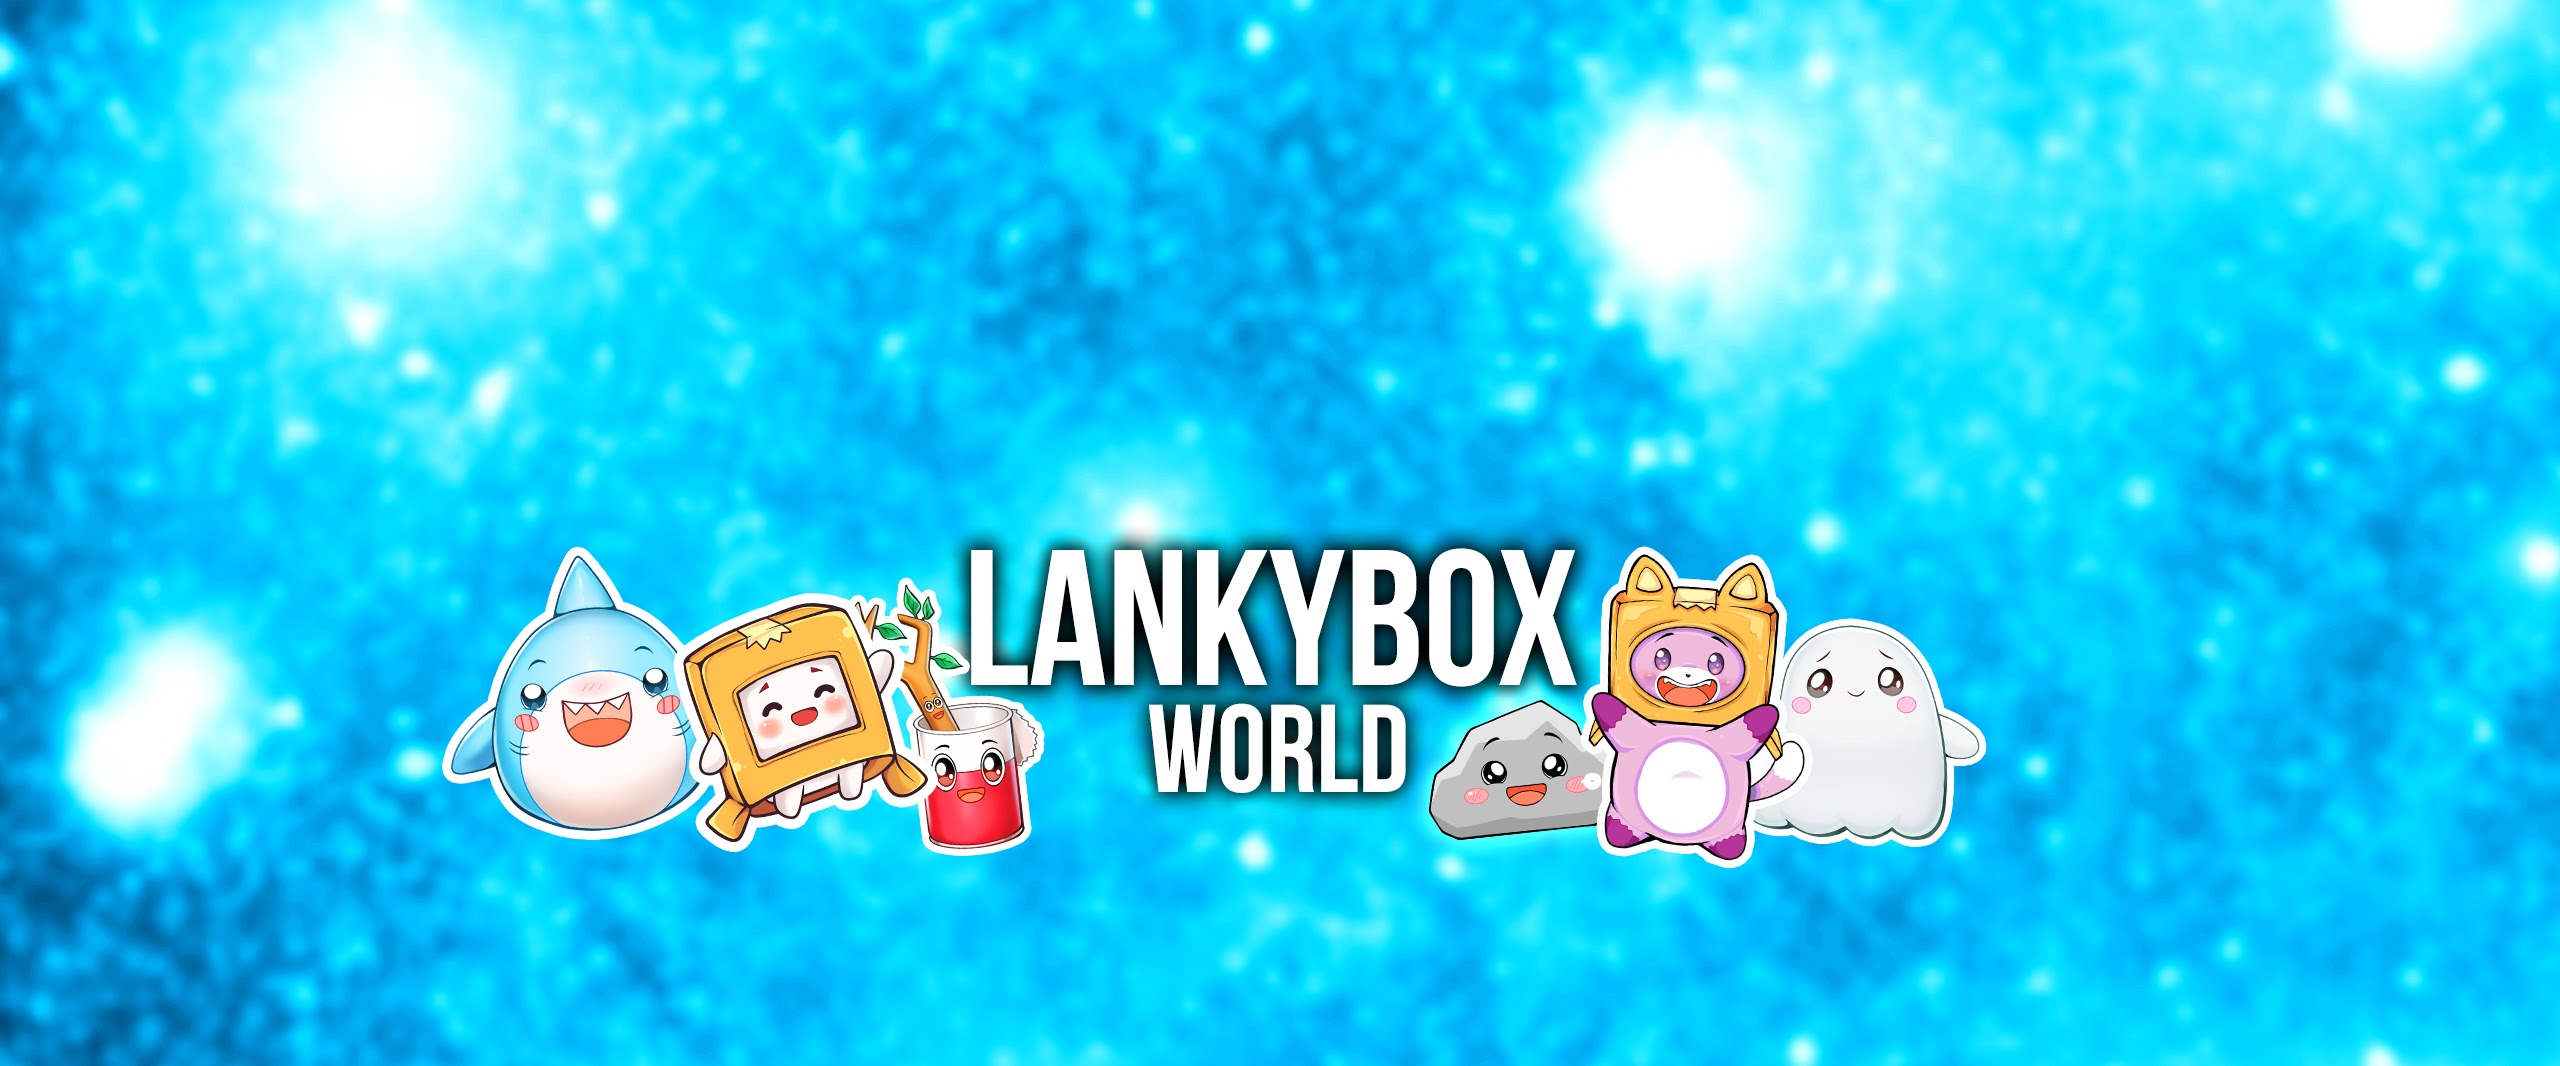 THE ROBLOX OOF SONG! 🎵 (Official LankyBox Music Video) 